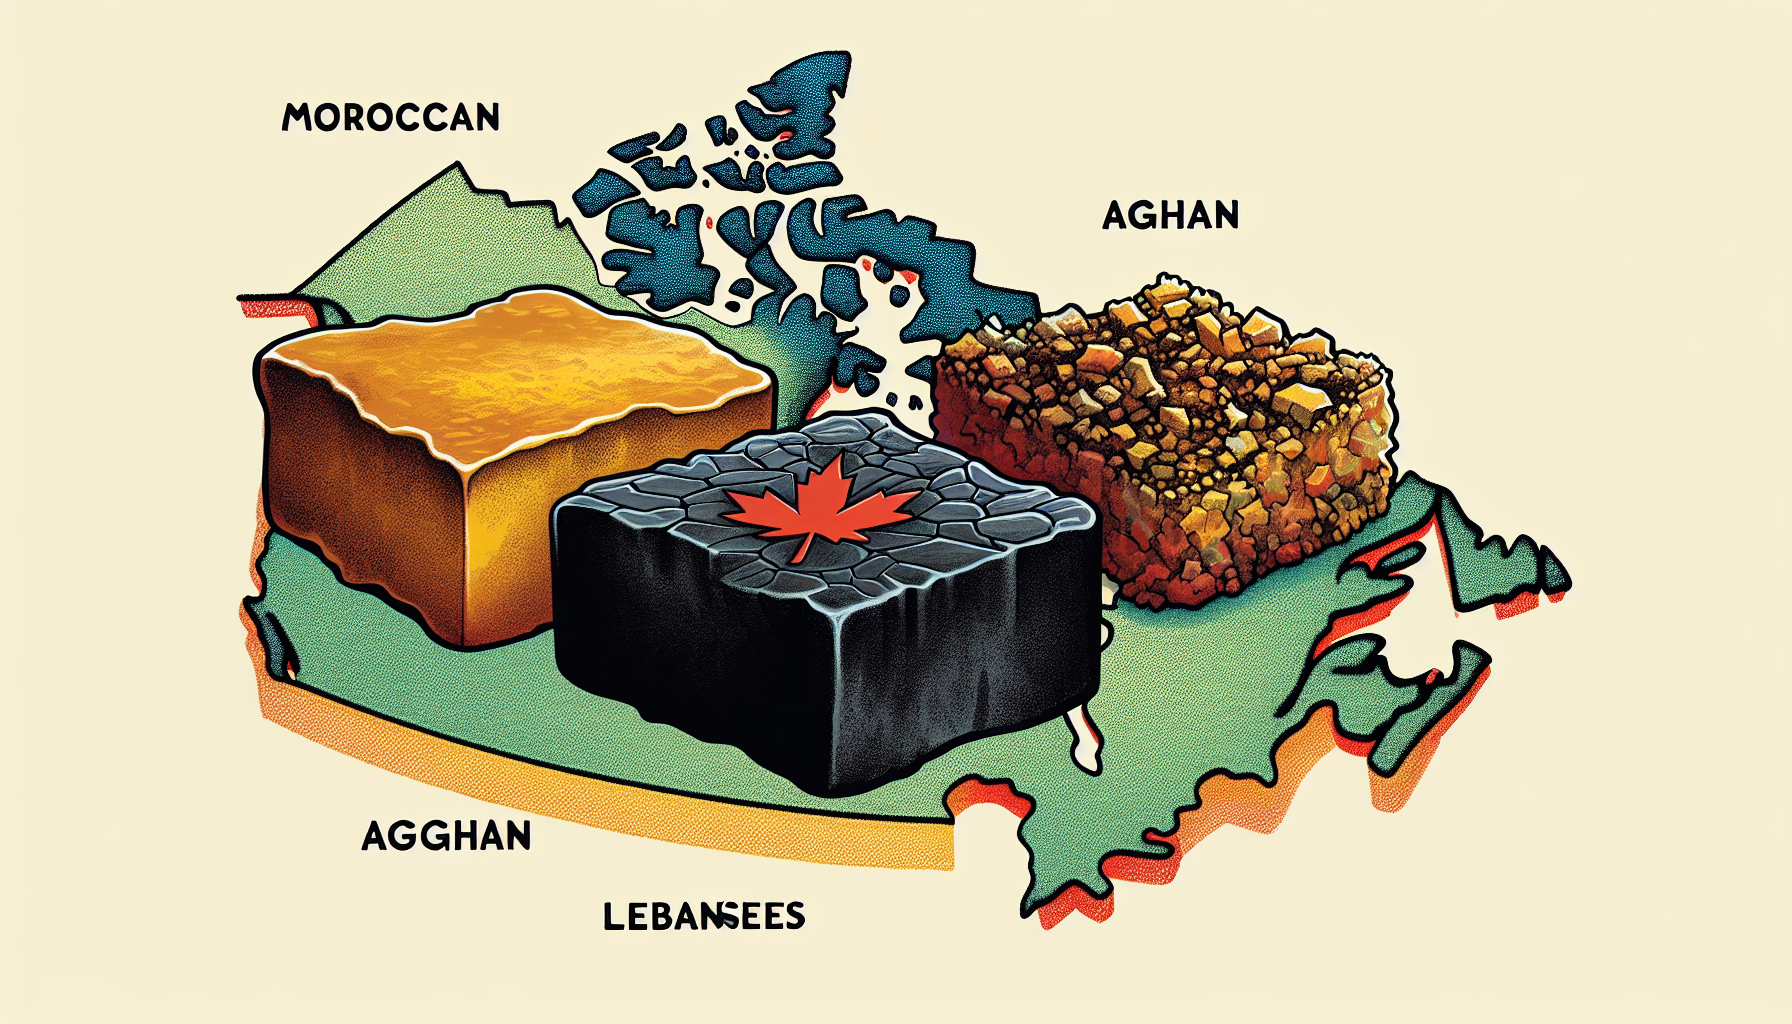 Selection of popular hash types in Canada